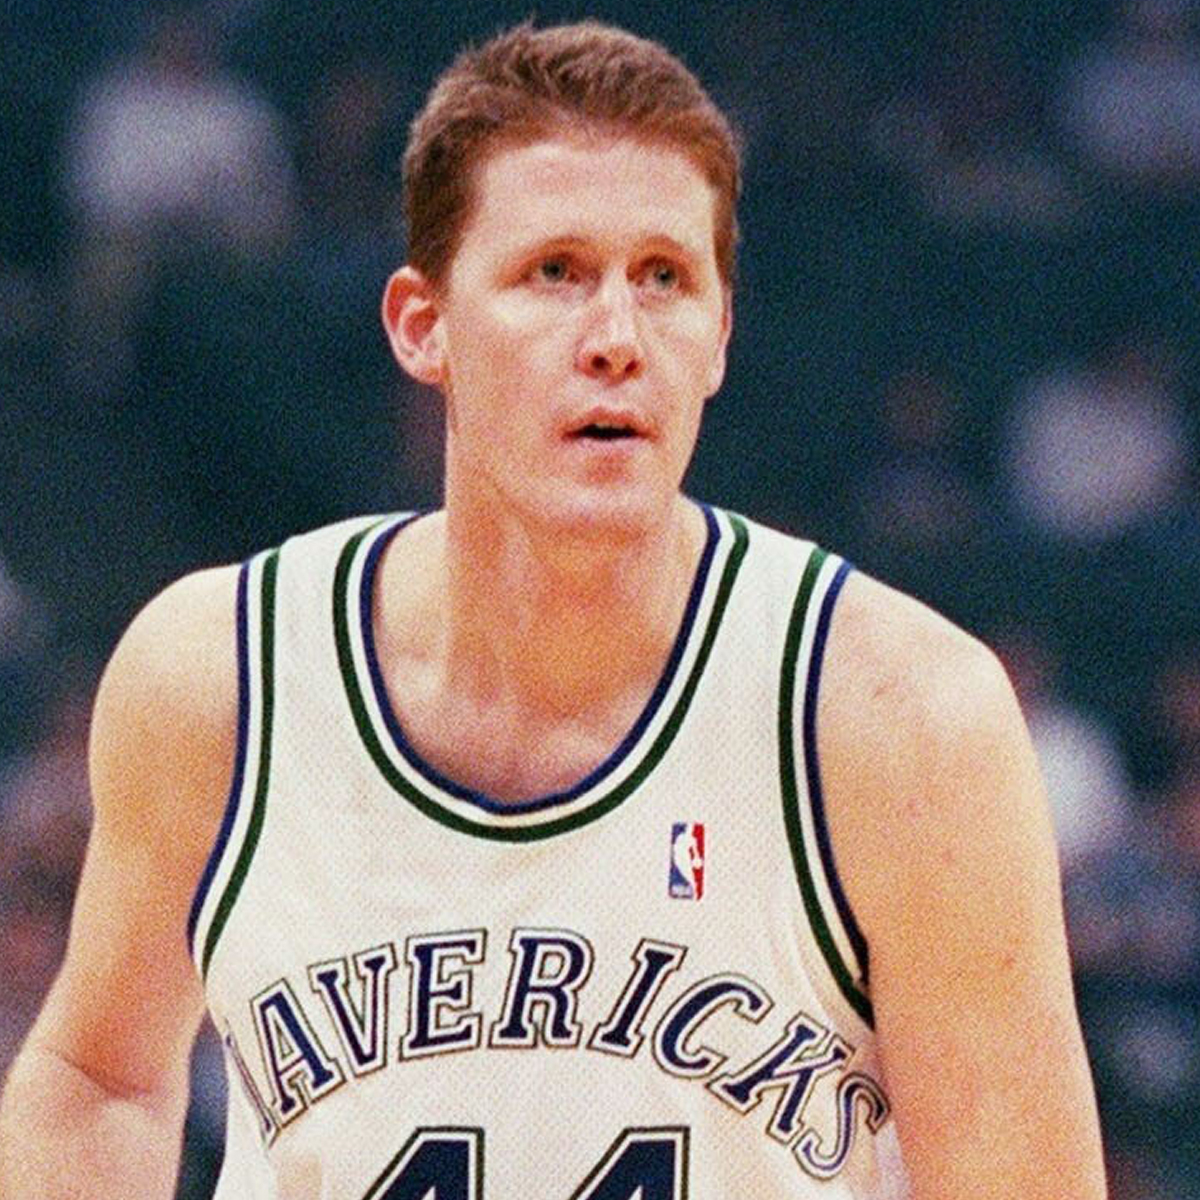 Mavs From the Past: Shawn Bradley